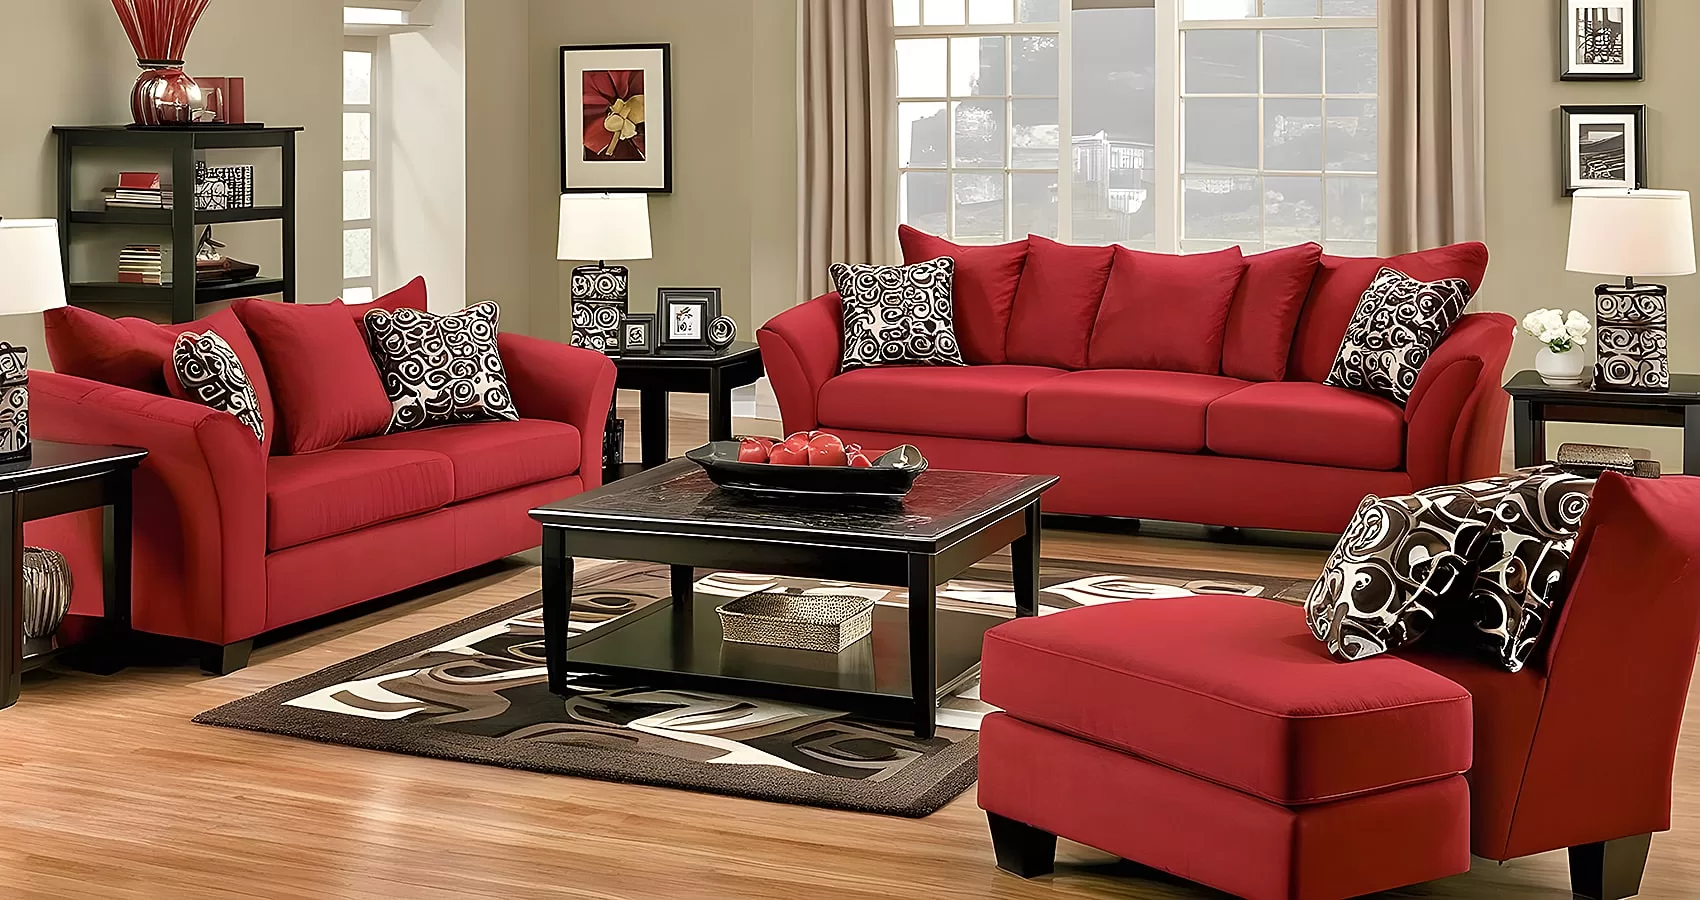 Red Couch Living Room Ideas | Living Room Ideas with Red Couch | Living Room Ideas Red Couch | Living Room with Red Sofa